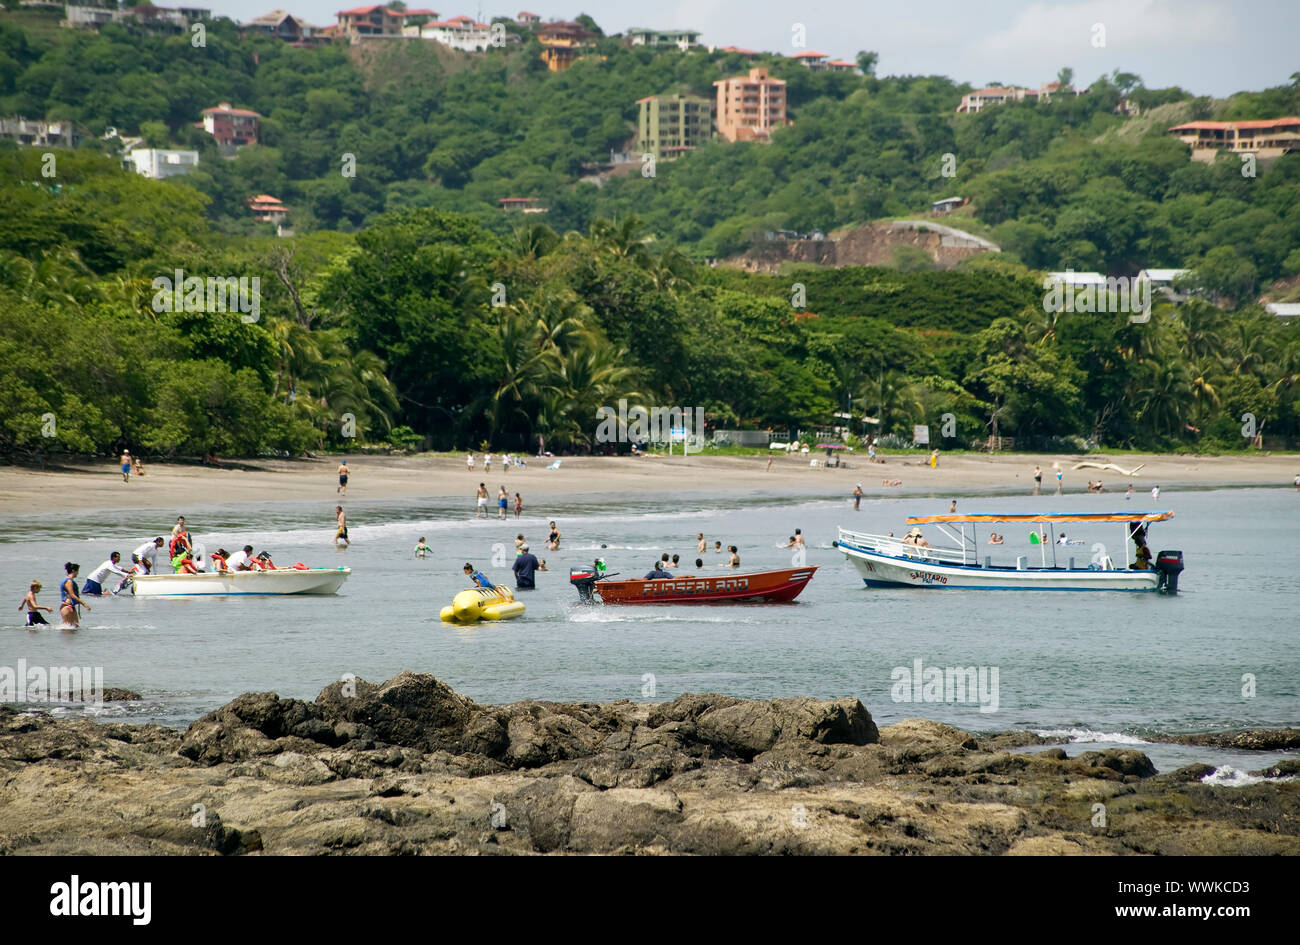 People and boats in the water at Playa Hermosa Costa Rica Stock Photo